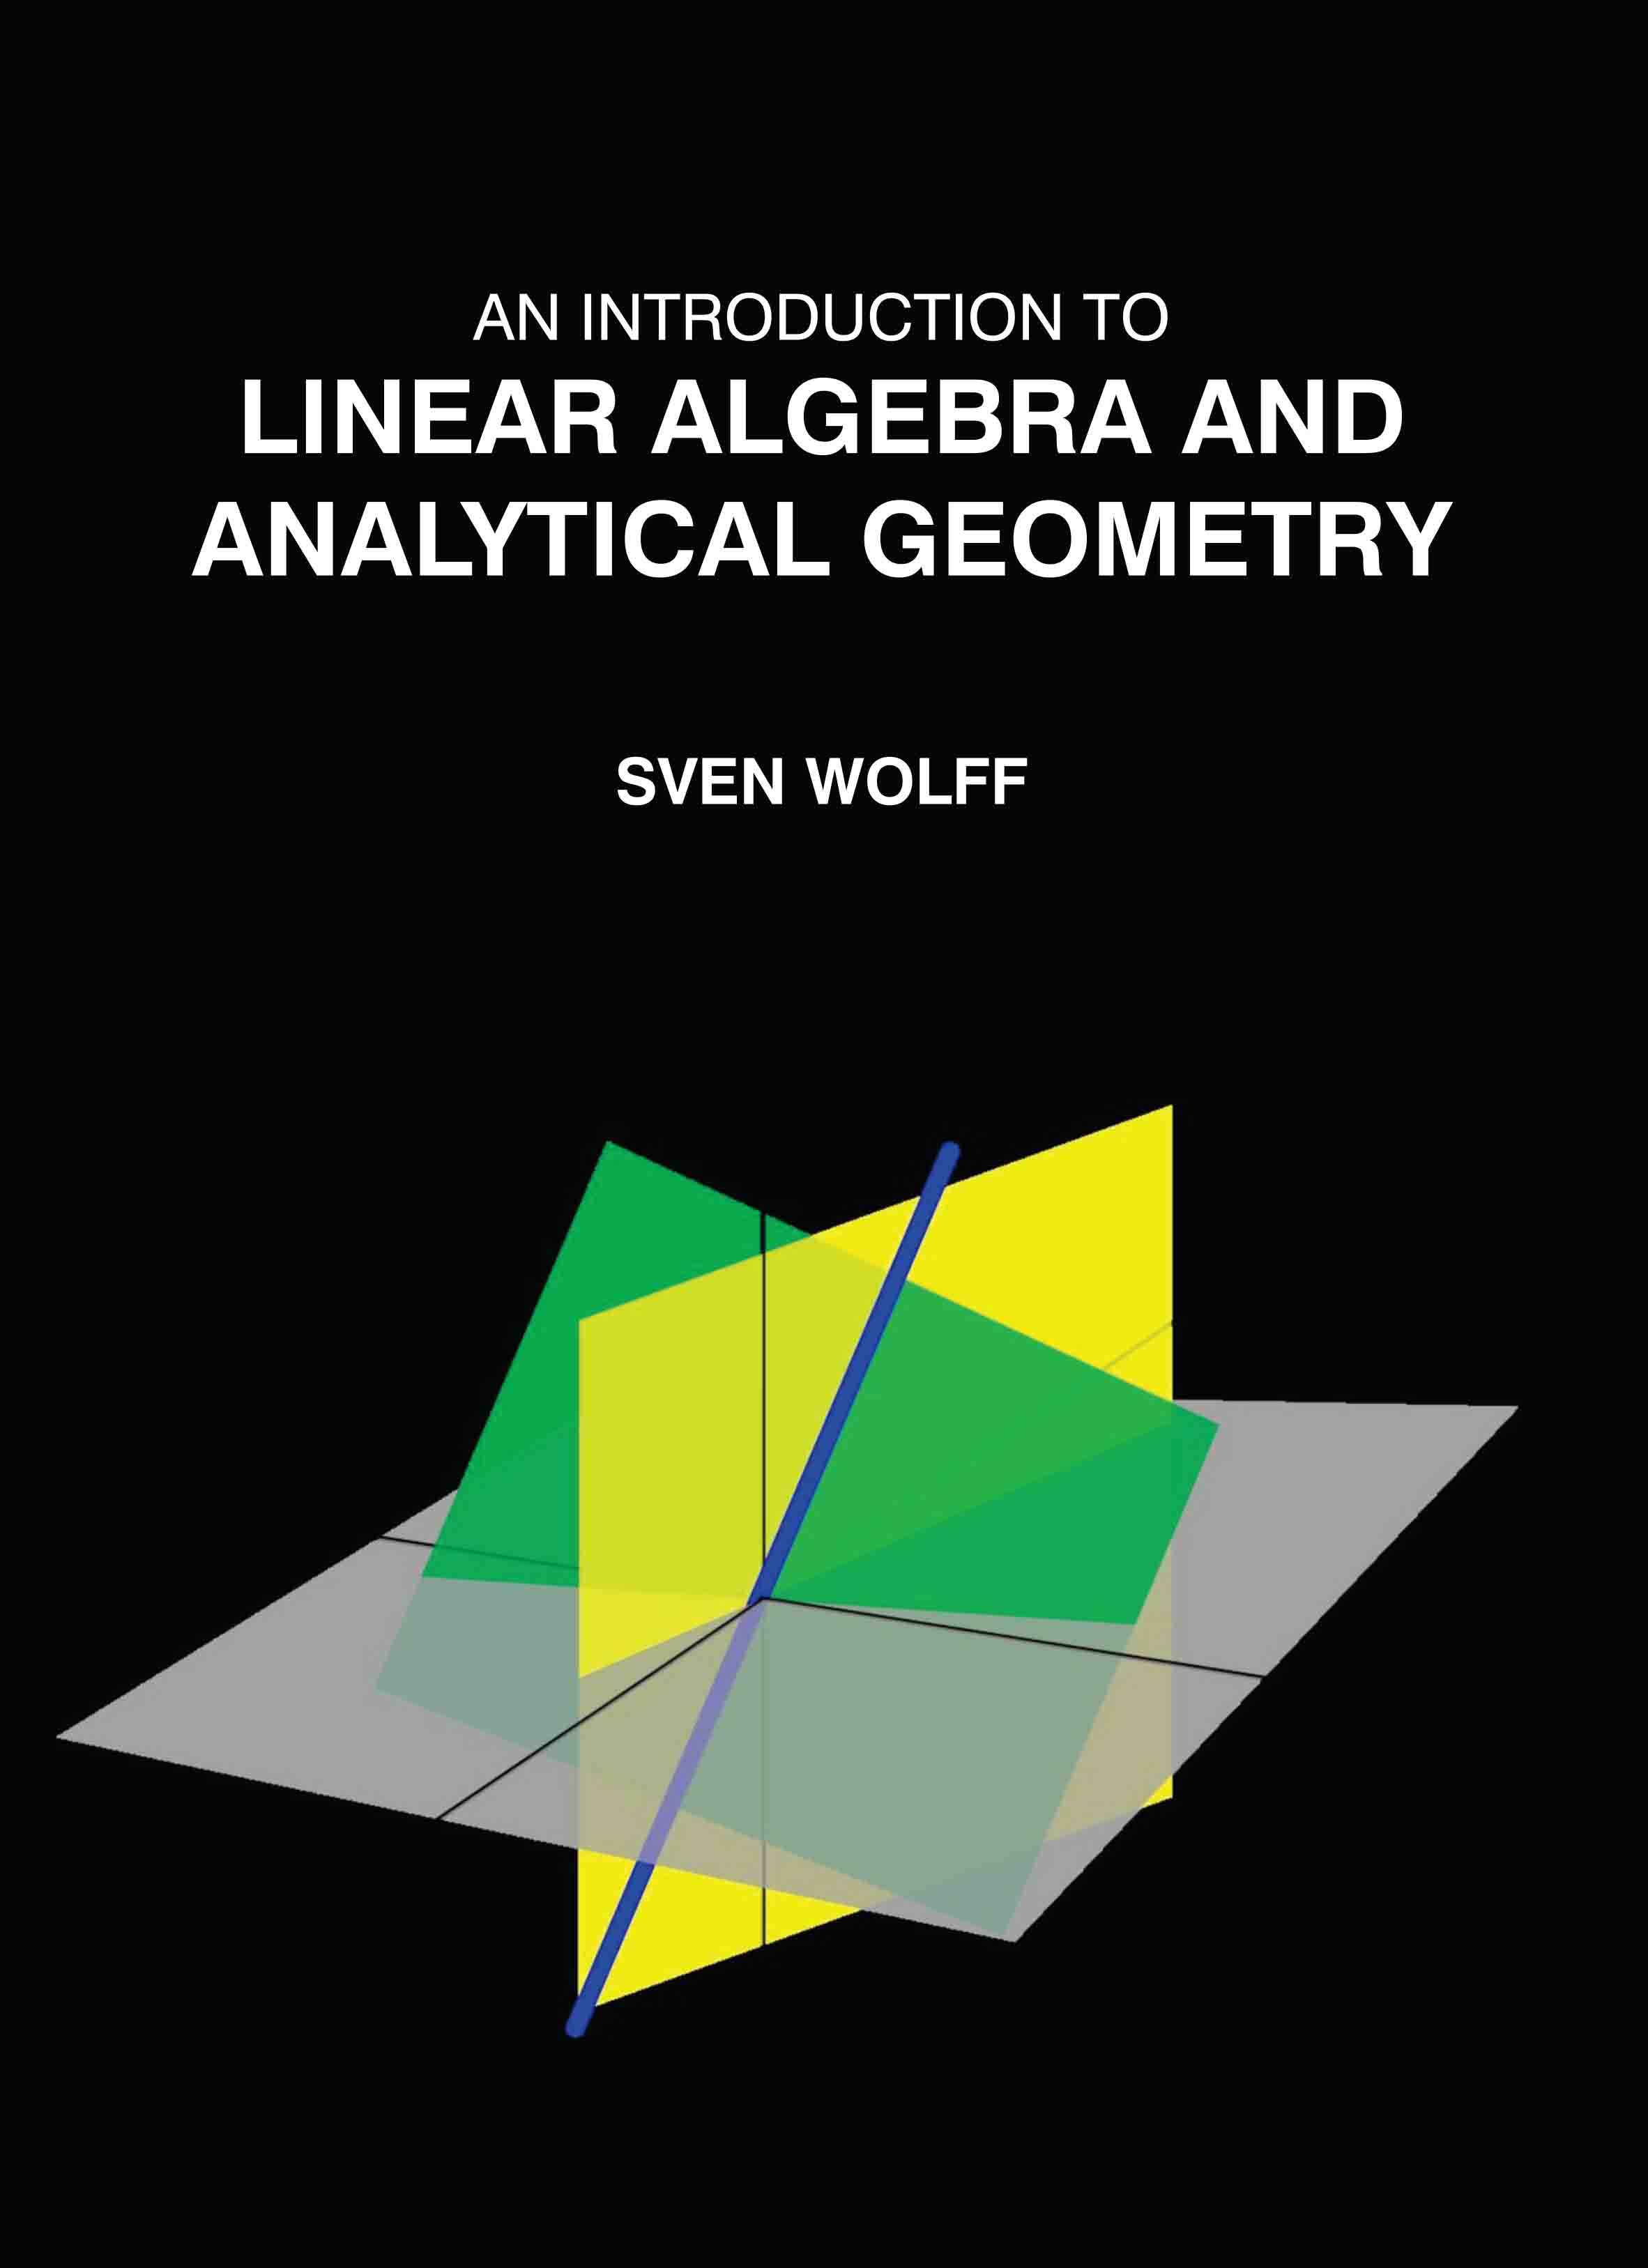 An Introduction to Linear Algebra and Analytical Geometry